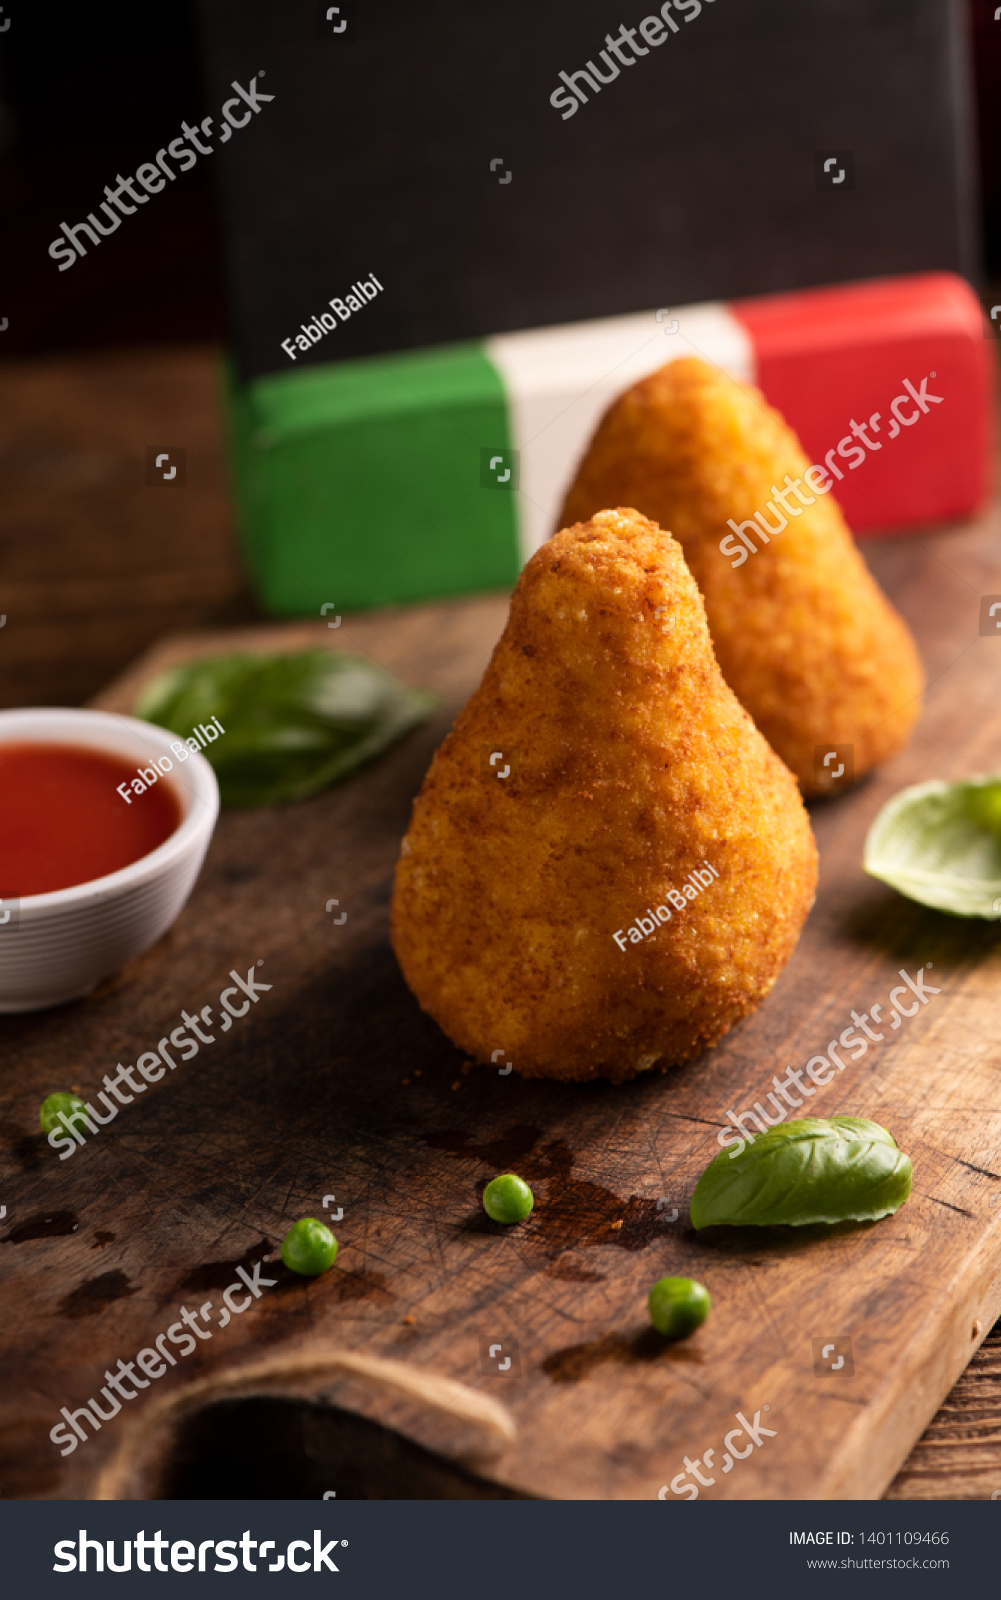 Stock Photo Delicious Rice Balls Made With Fried Rice Typical Dish Of Sicilian Italian Cuisine Arancini 1401109466 